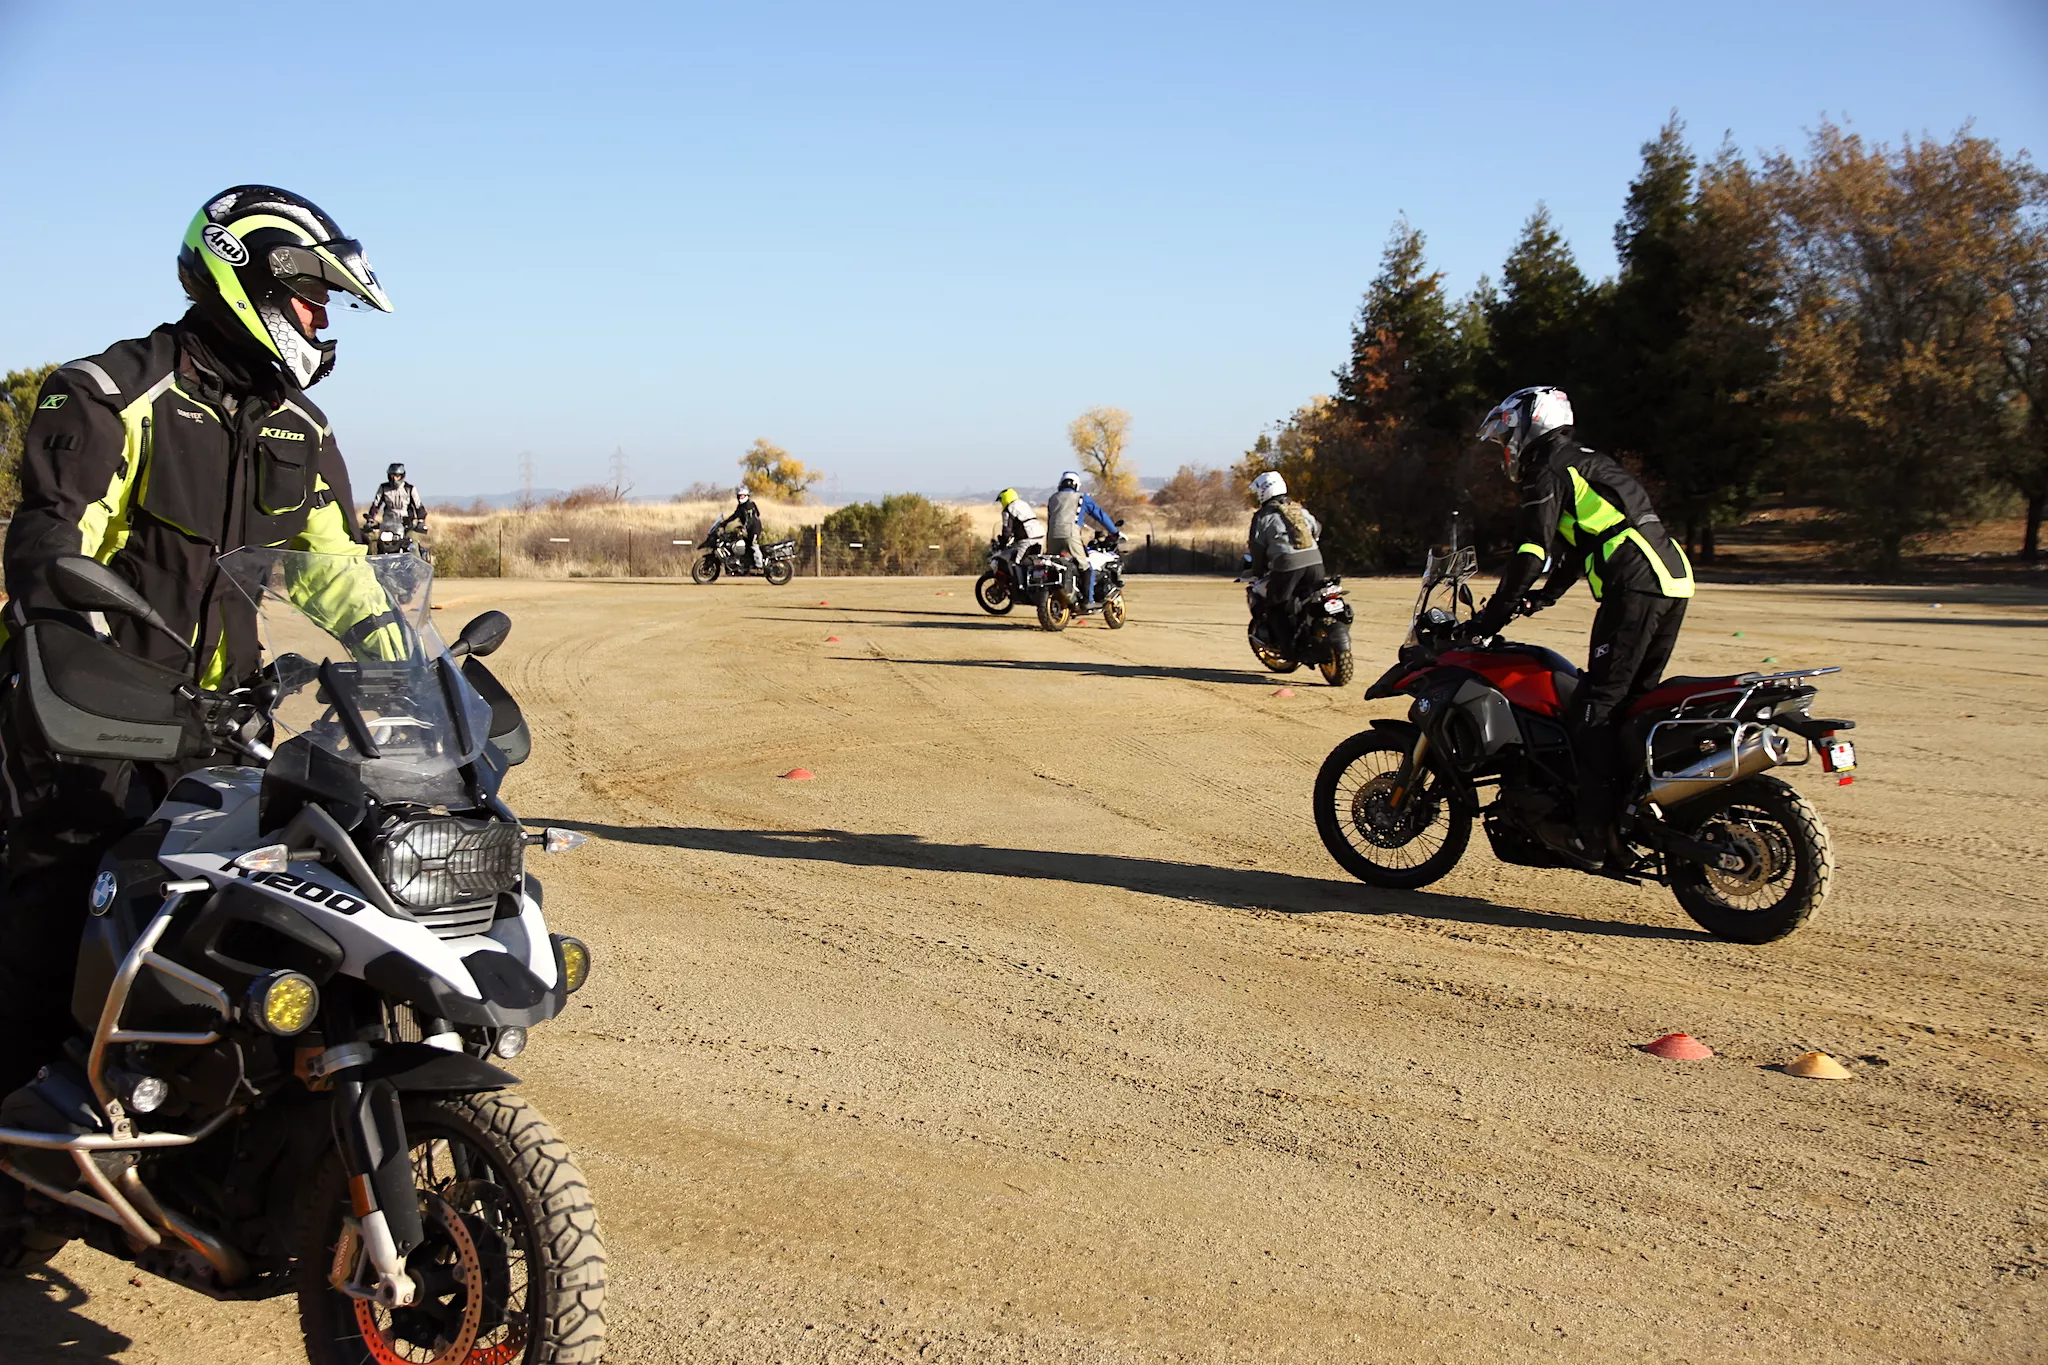 Pacific Motorcycle Training in USA, North America | Motorcycles - Rated 1